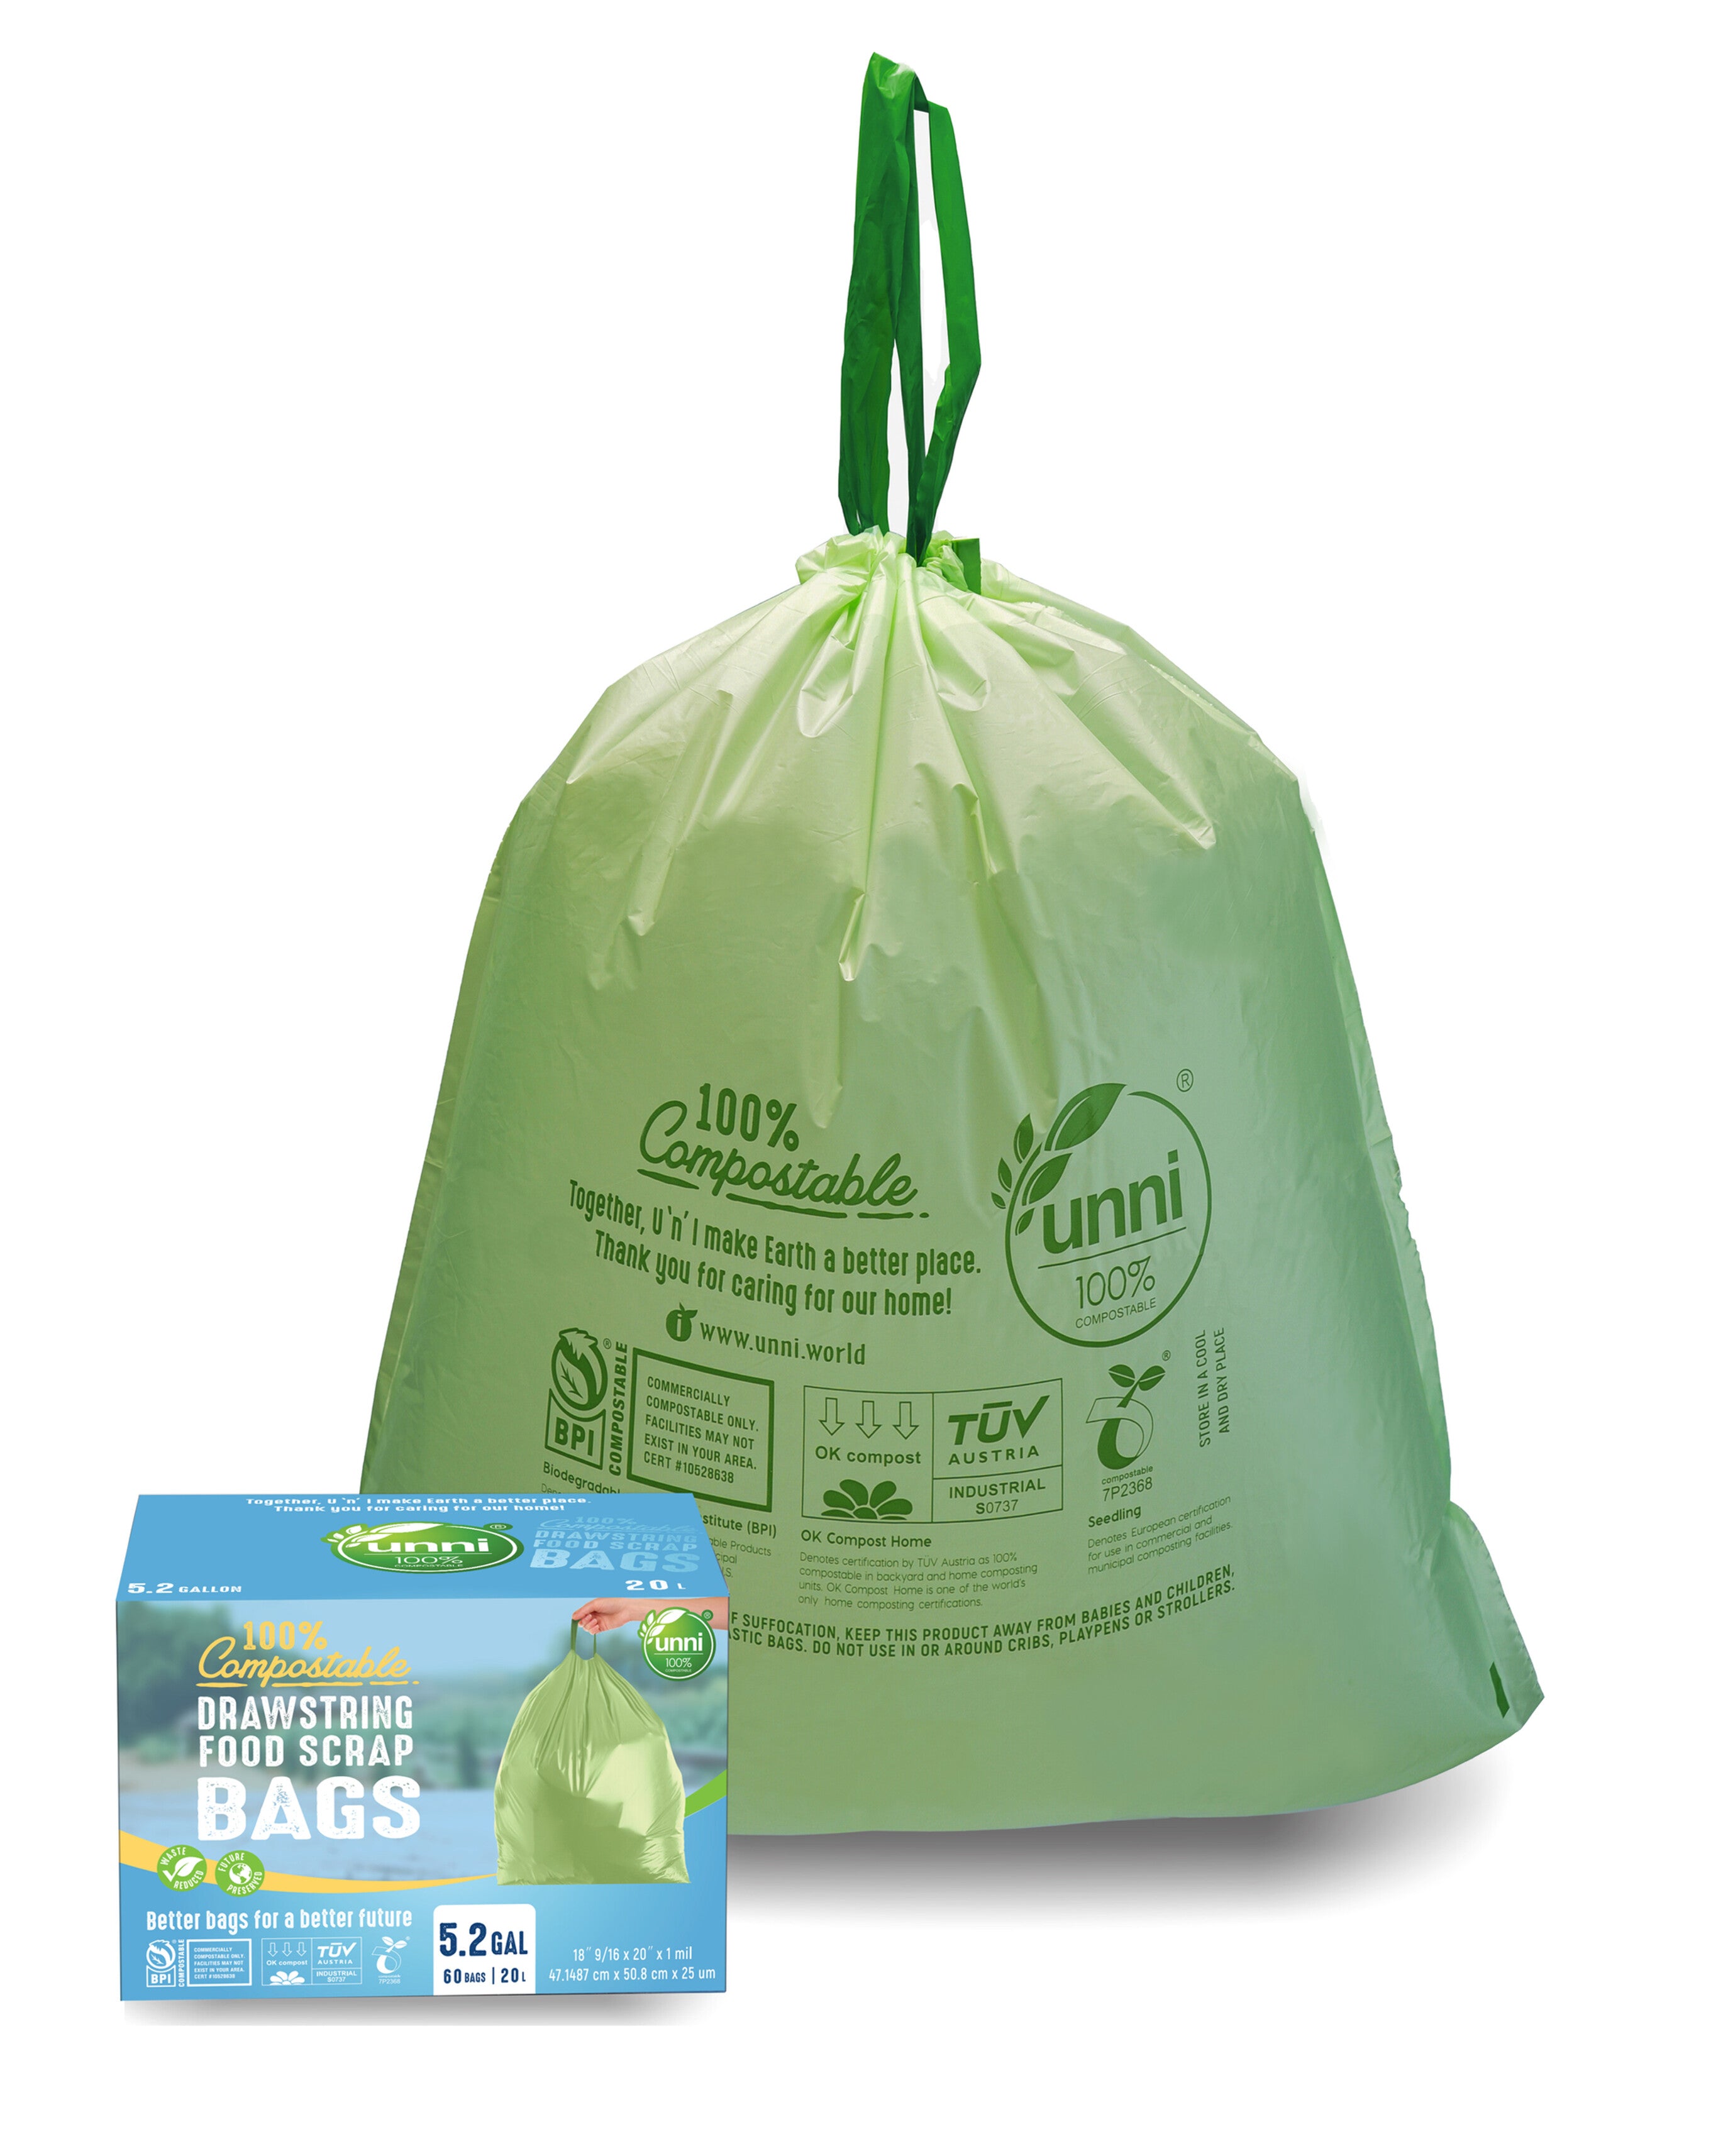 We used HoldOn's compostable trash and storage bags for a few